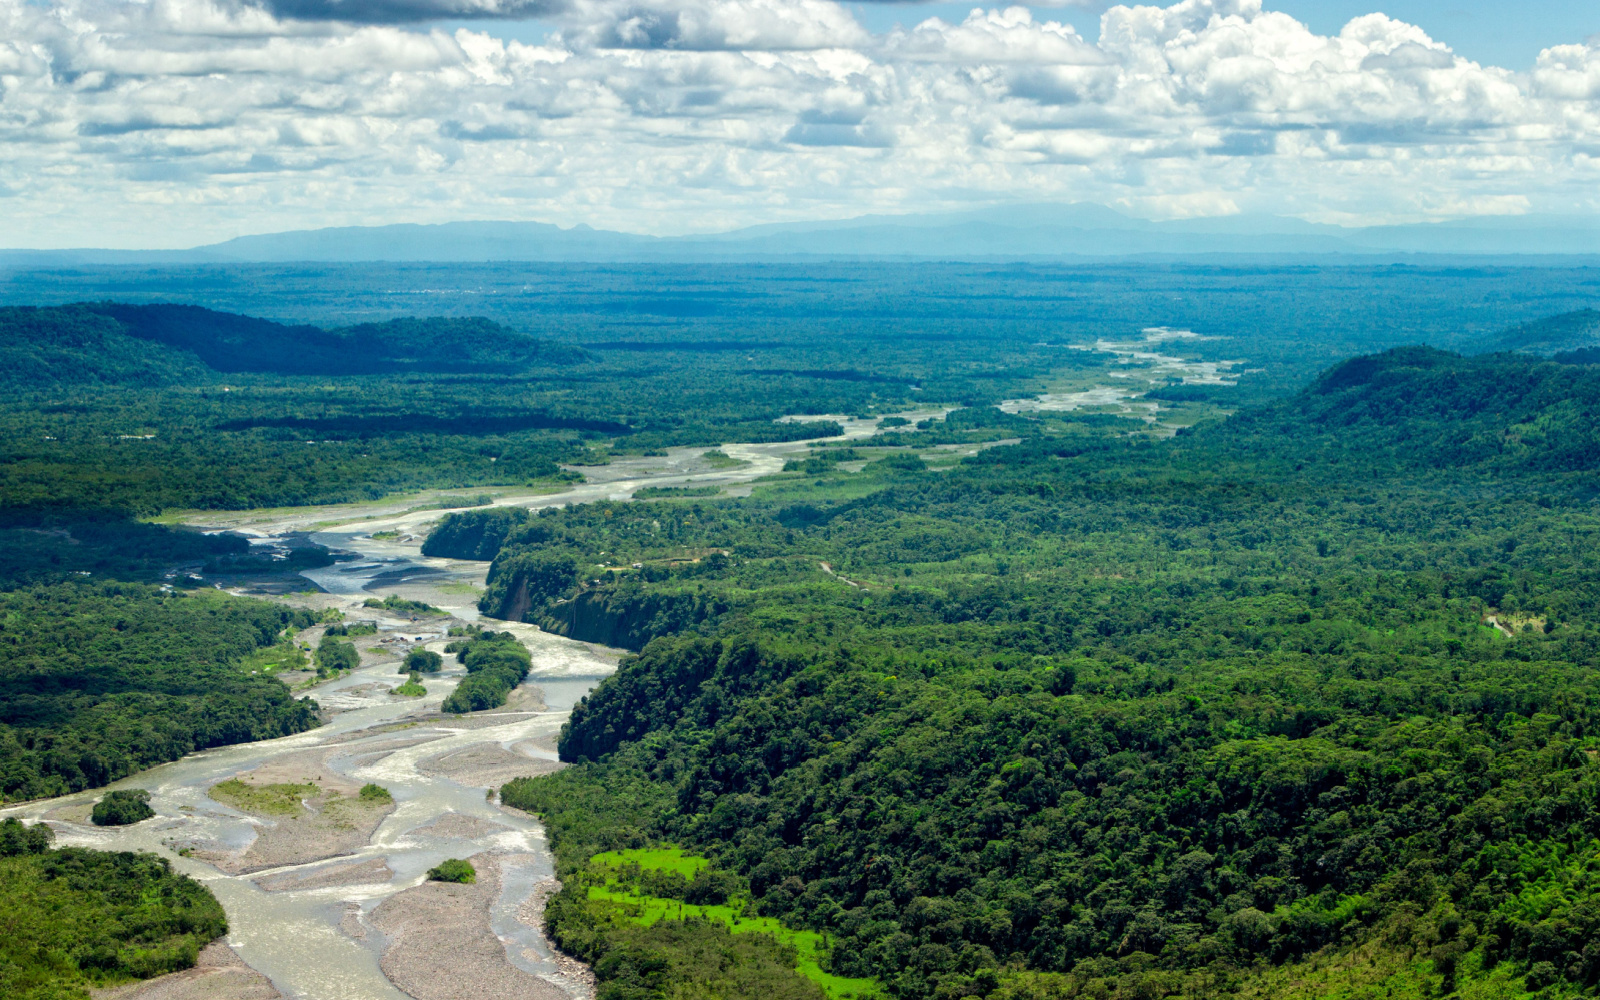 The Best & Worst Times to Visit the Amazon in 2023